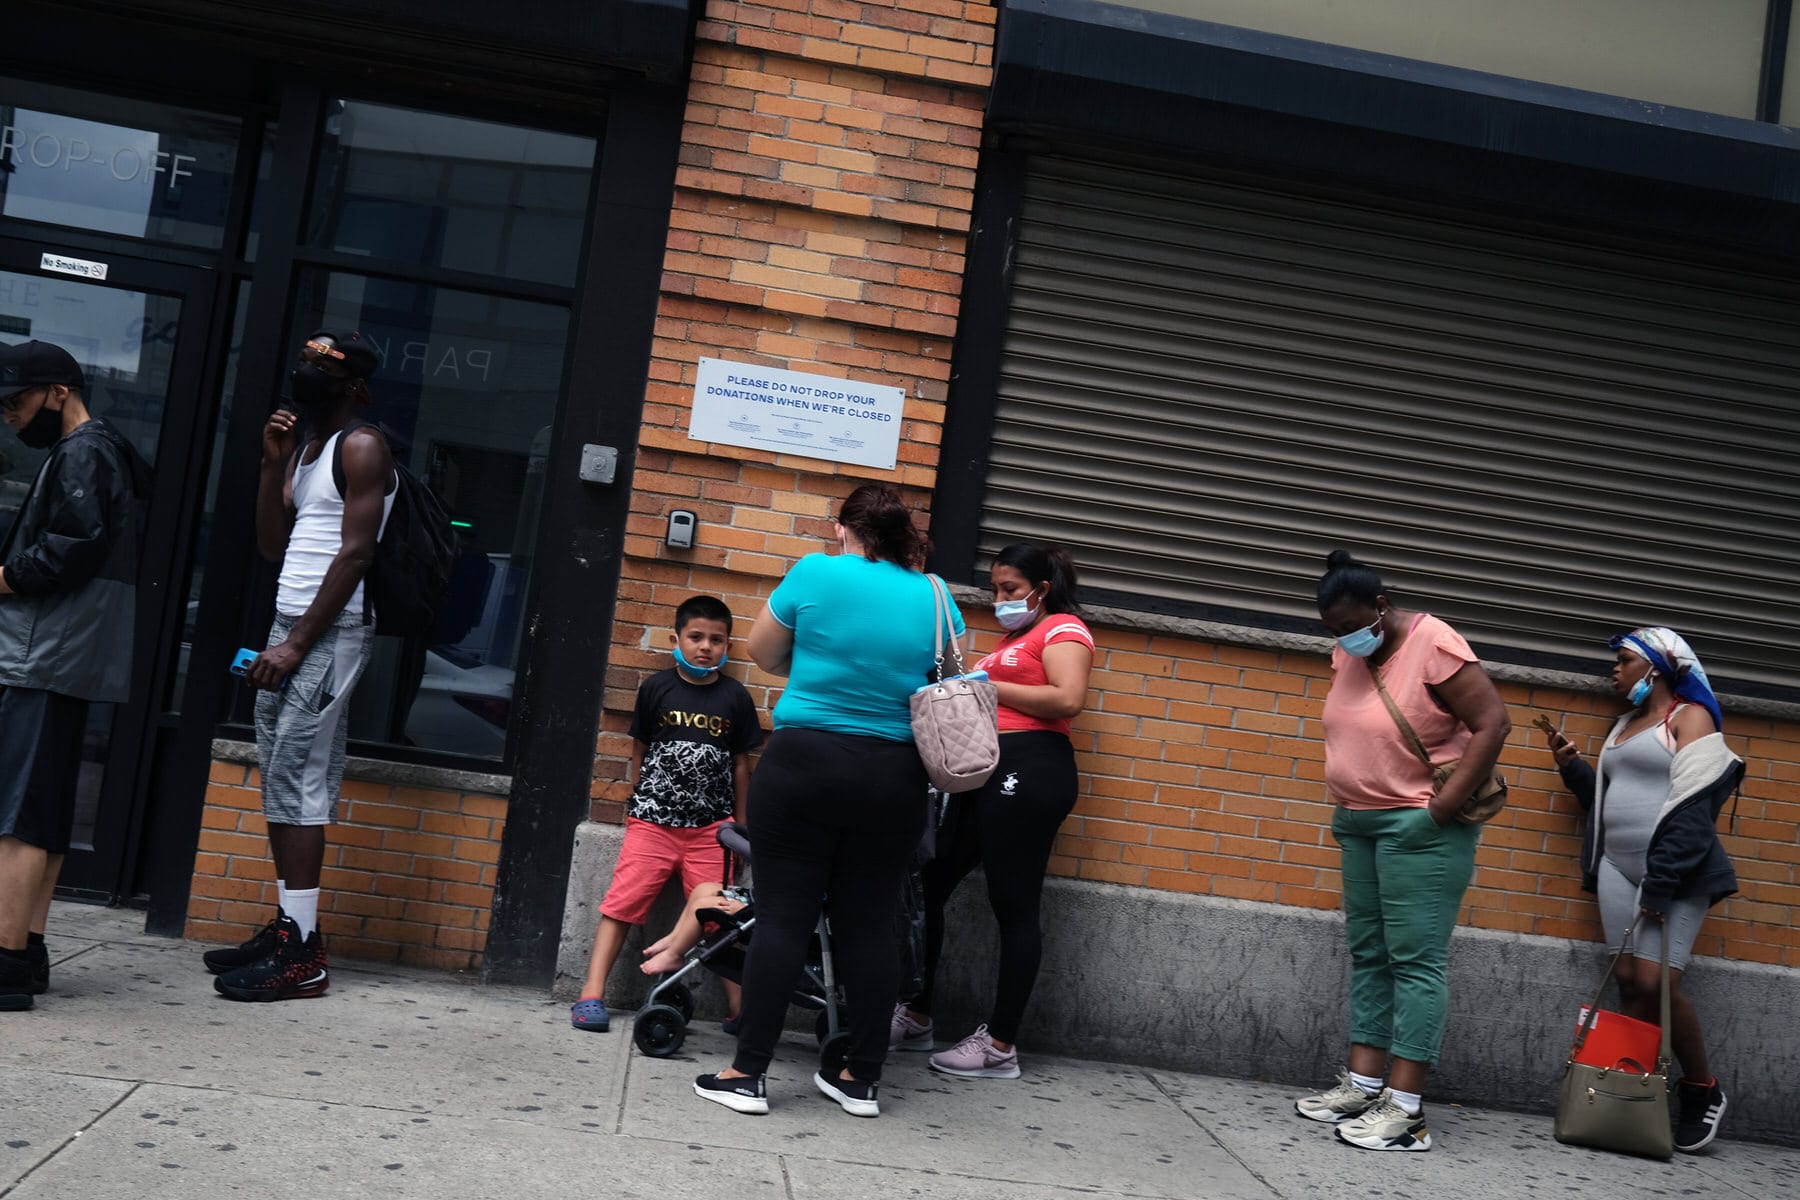 People wait in line for food assistance cards on July 07, 2020 in the Brooklyn borough of New York City.